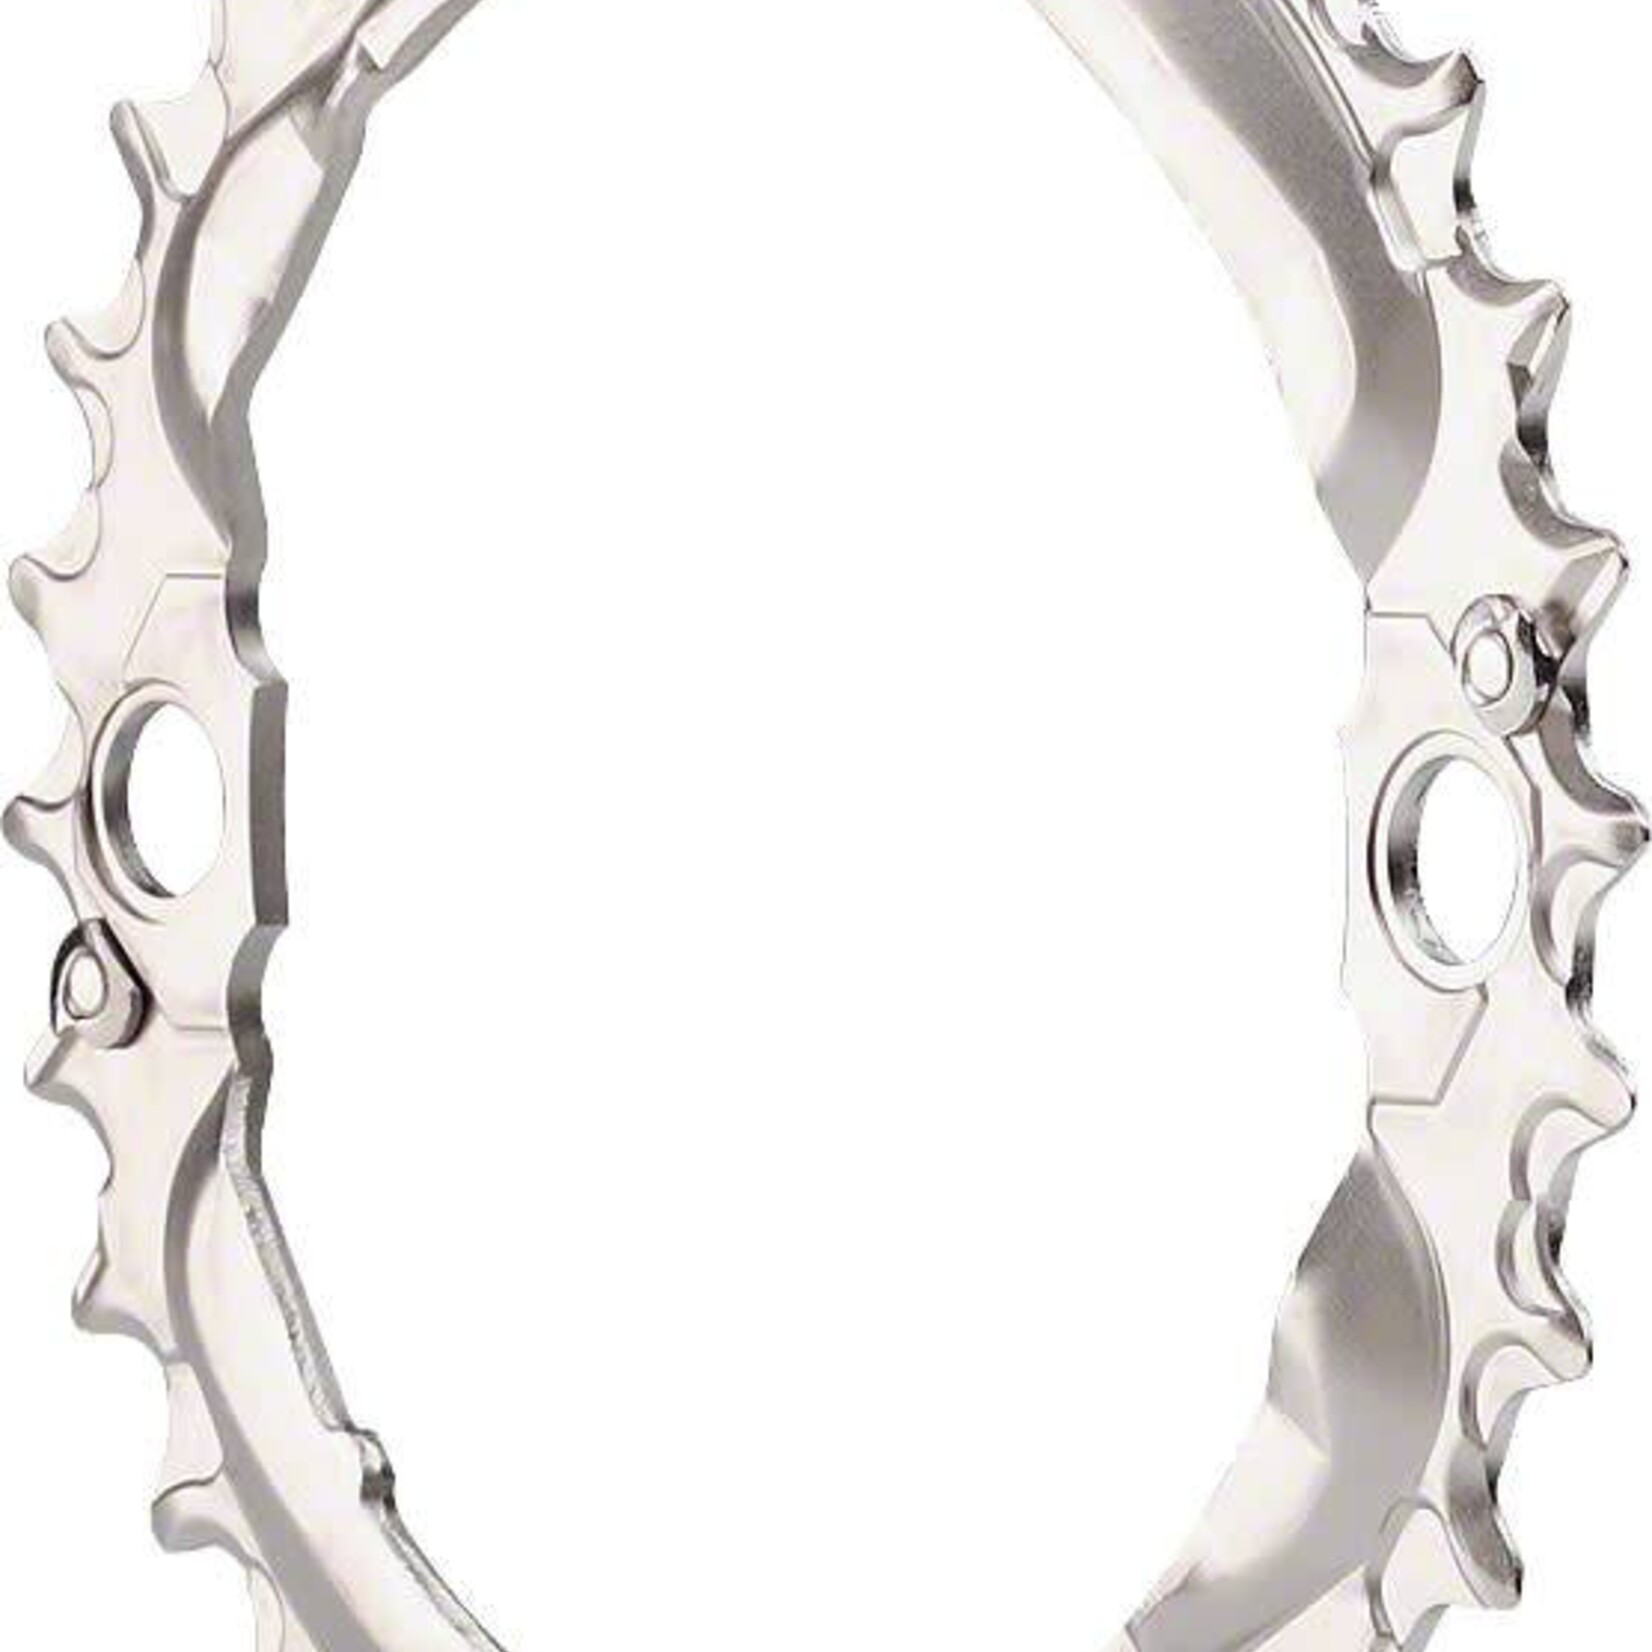 Shimano Shimano Deore M532 32t 104mm 9-Speed Chainring